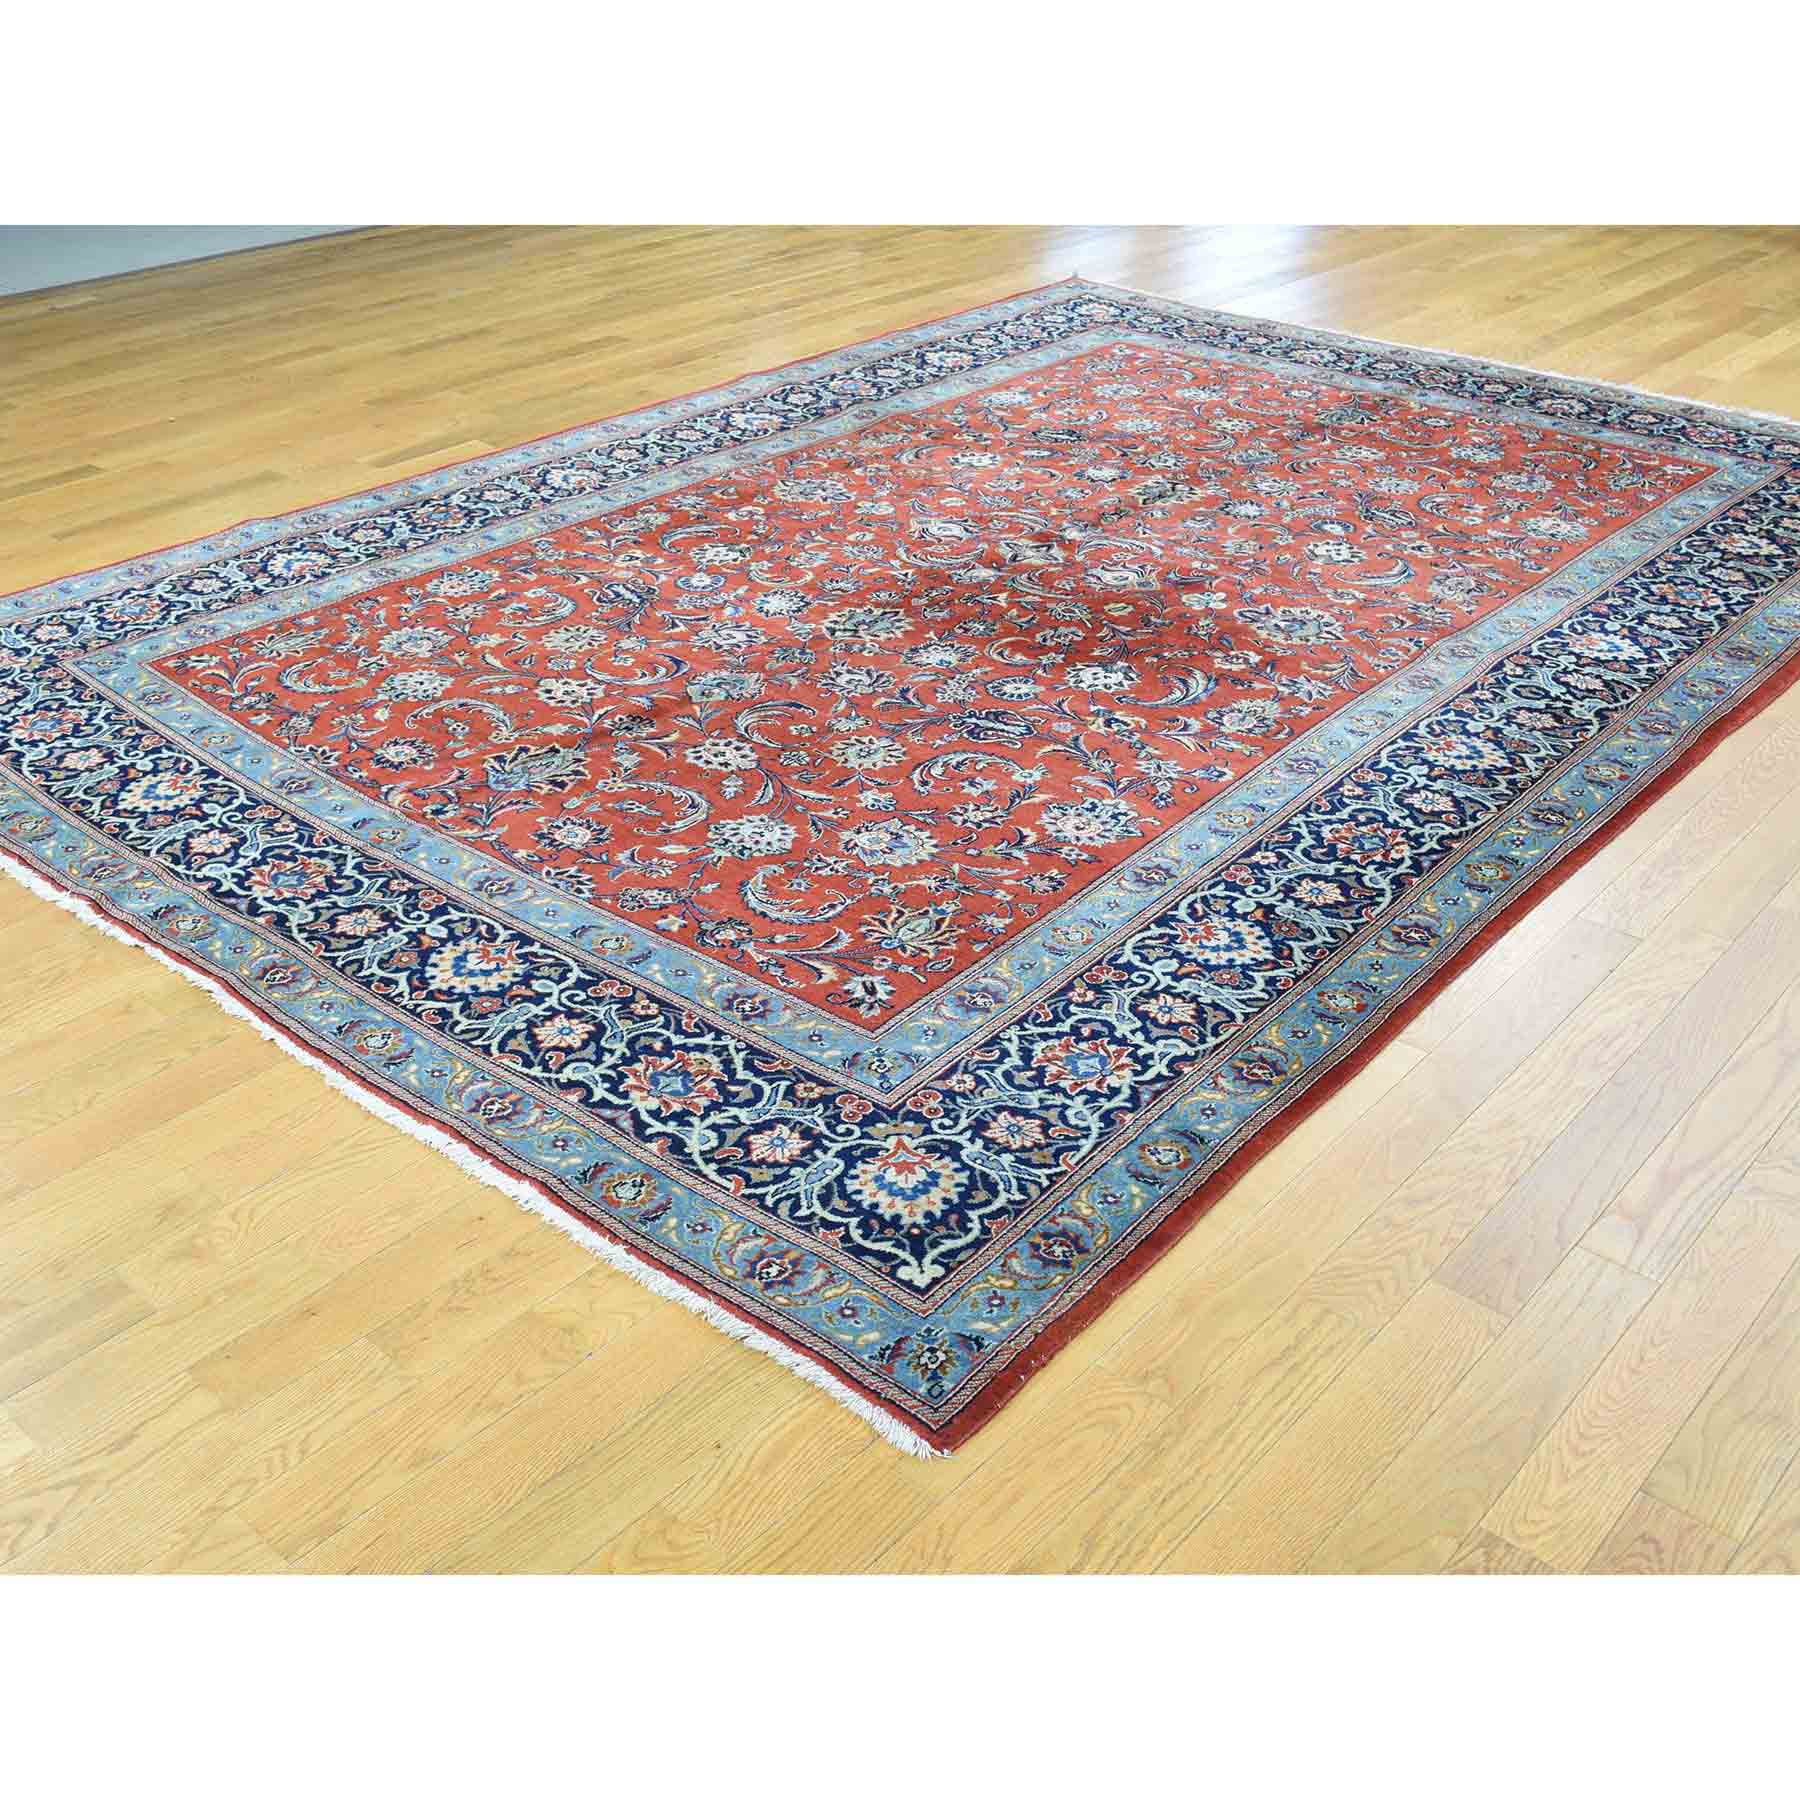 Antique-Hand-Knotted-Rug-160675